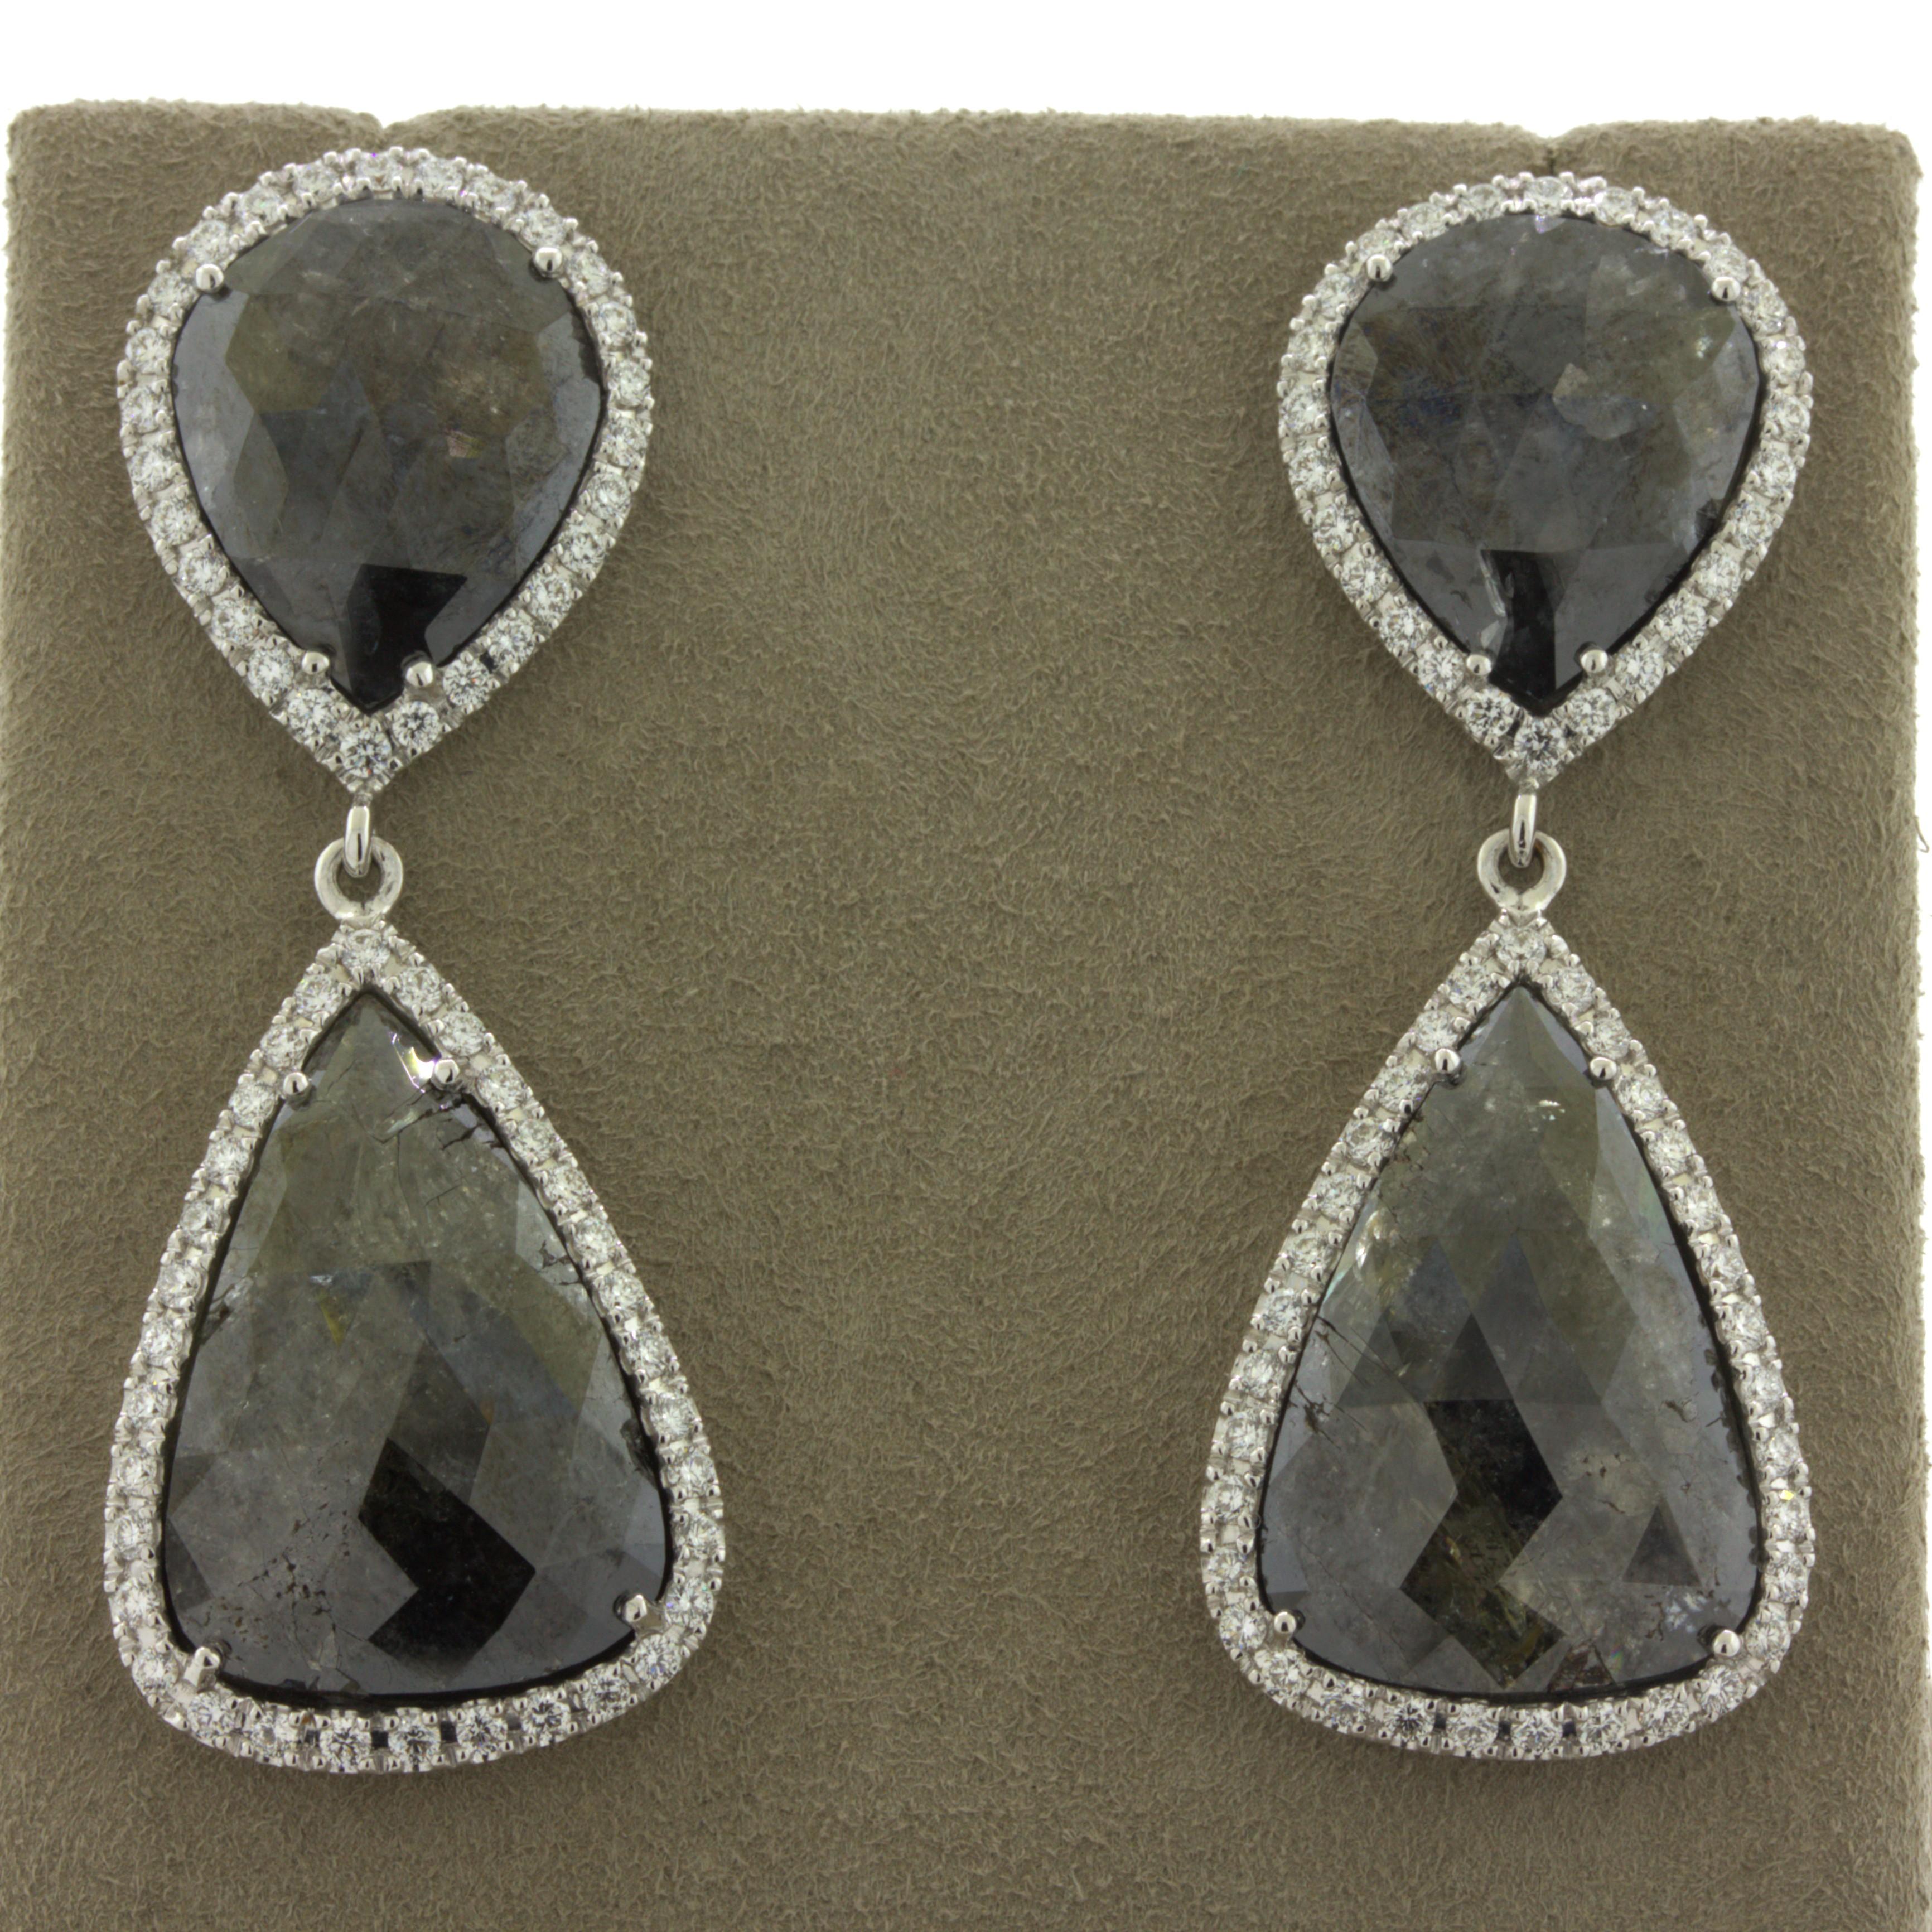 A lovely and substantial pair of diamond drop earrings featuring 4 large diamond slices weighing 30.35 carats! They are large slices of diamonds with a rose-cut finish on their tops to add brilliance to the stones. They are complemented by halos of